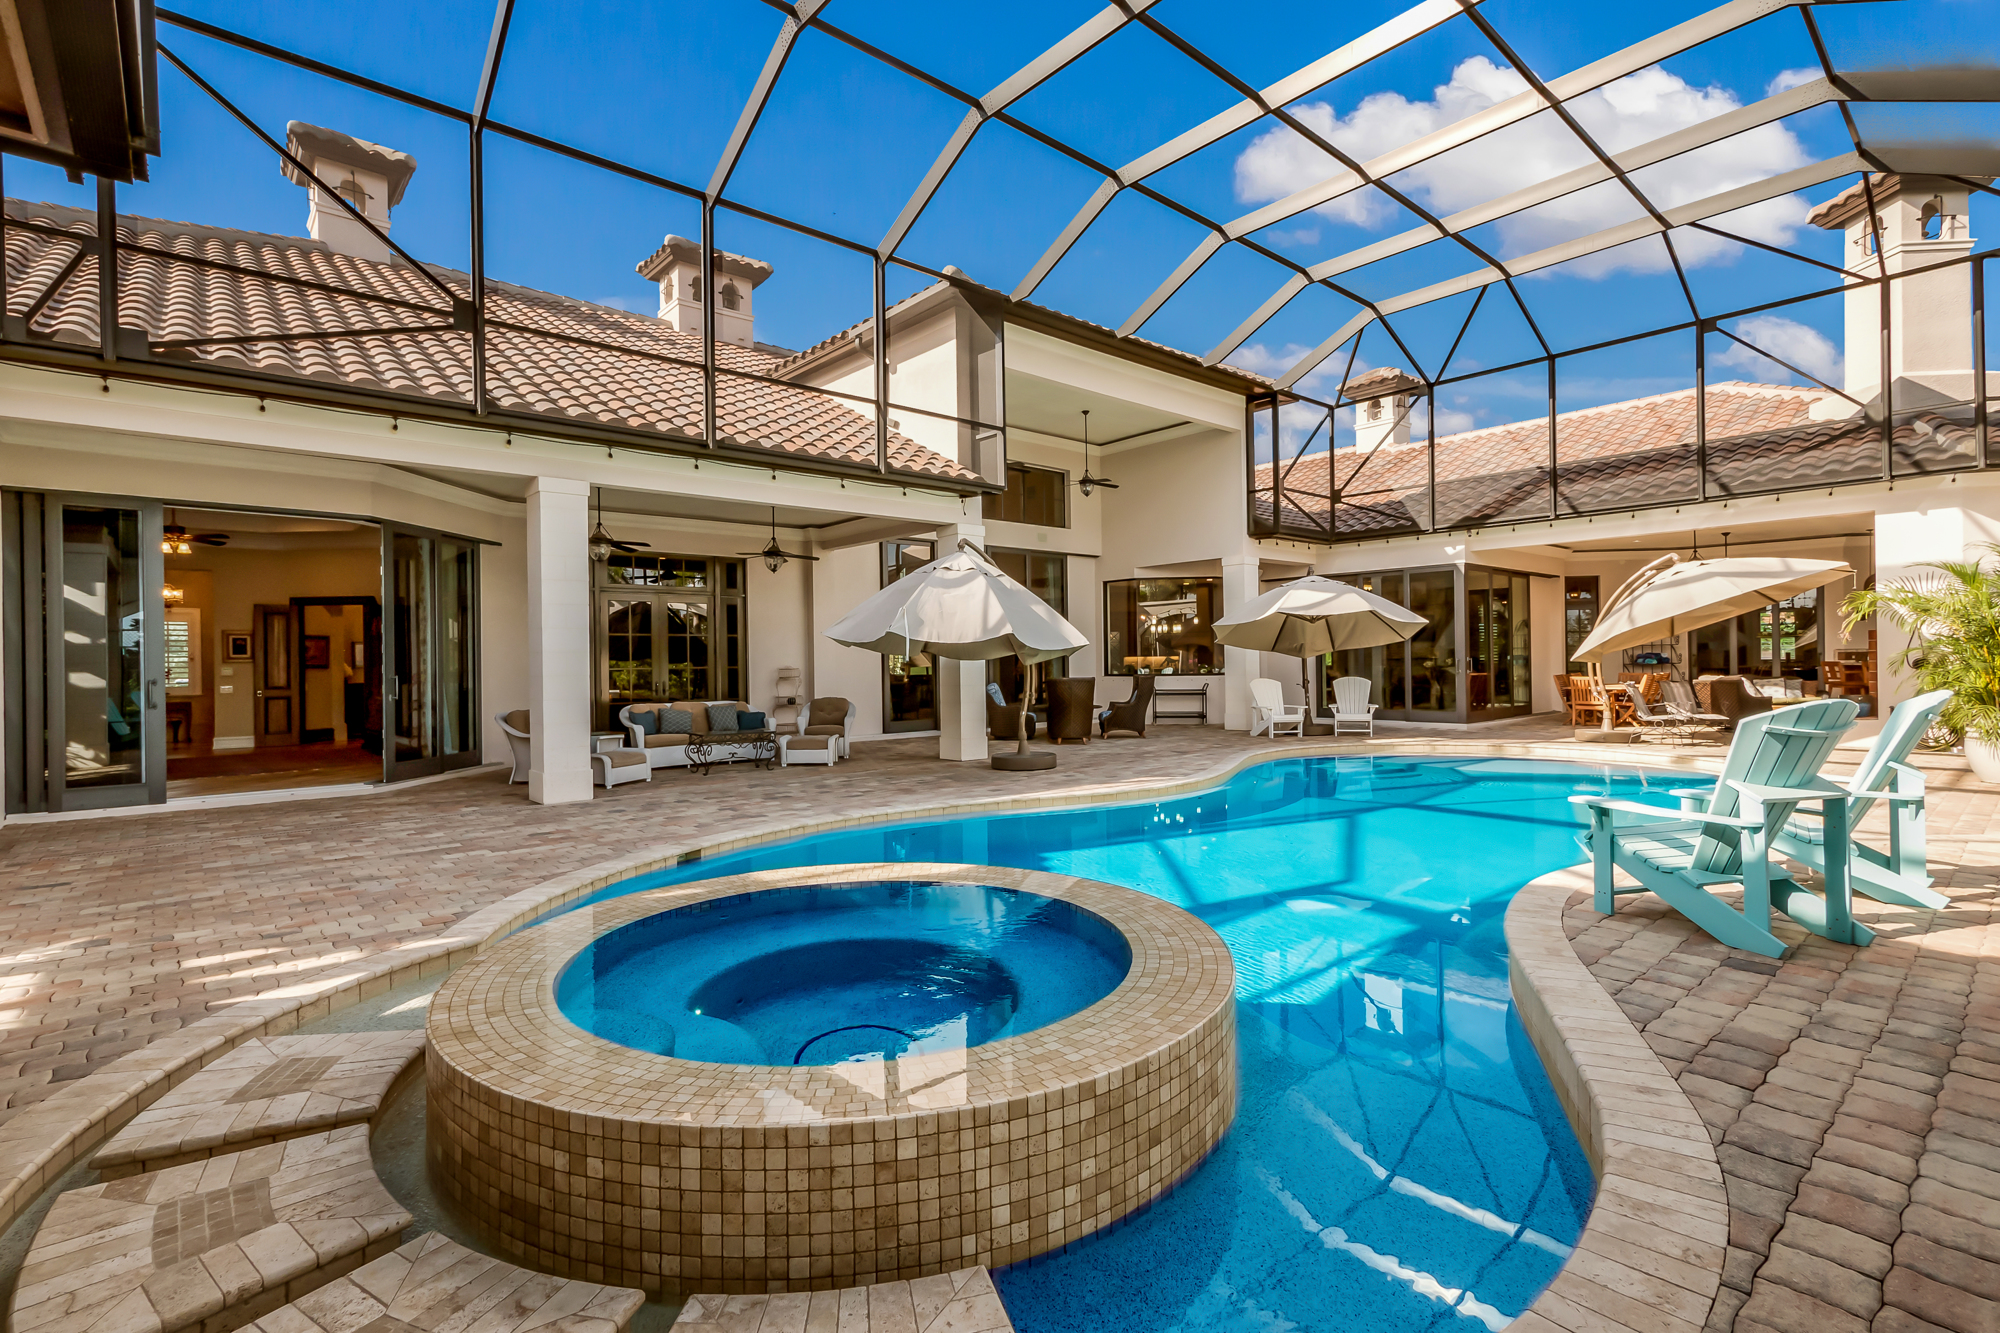 The oversized outdoor living area offers a pool and spa, plus an outdoor kitchen and plenty of seating.